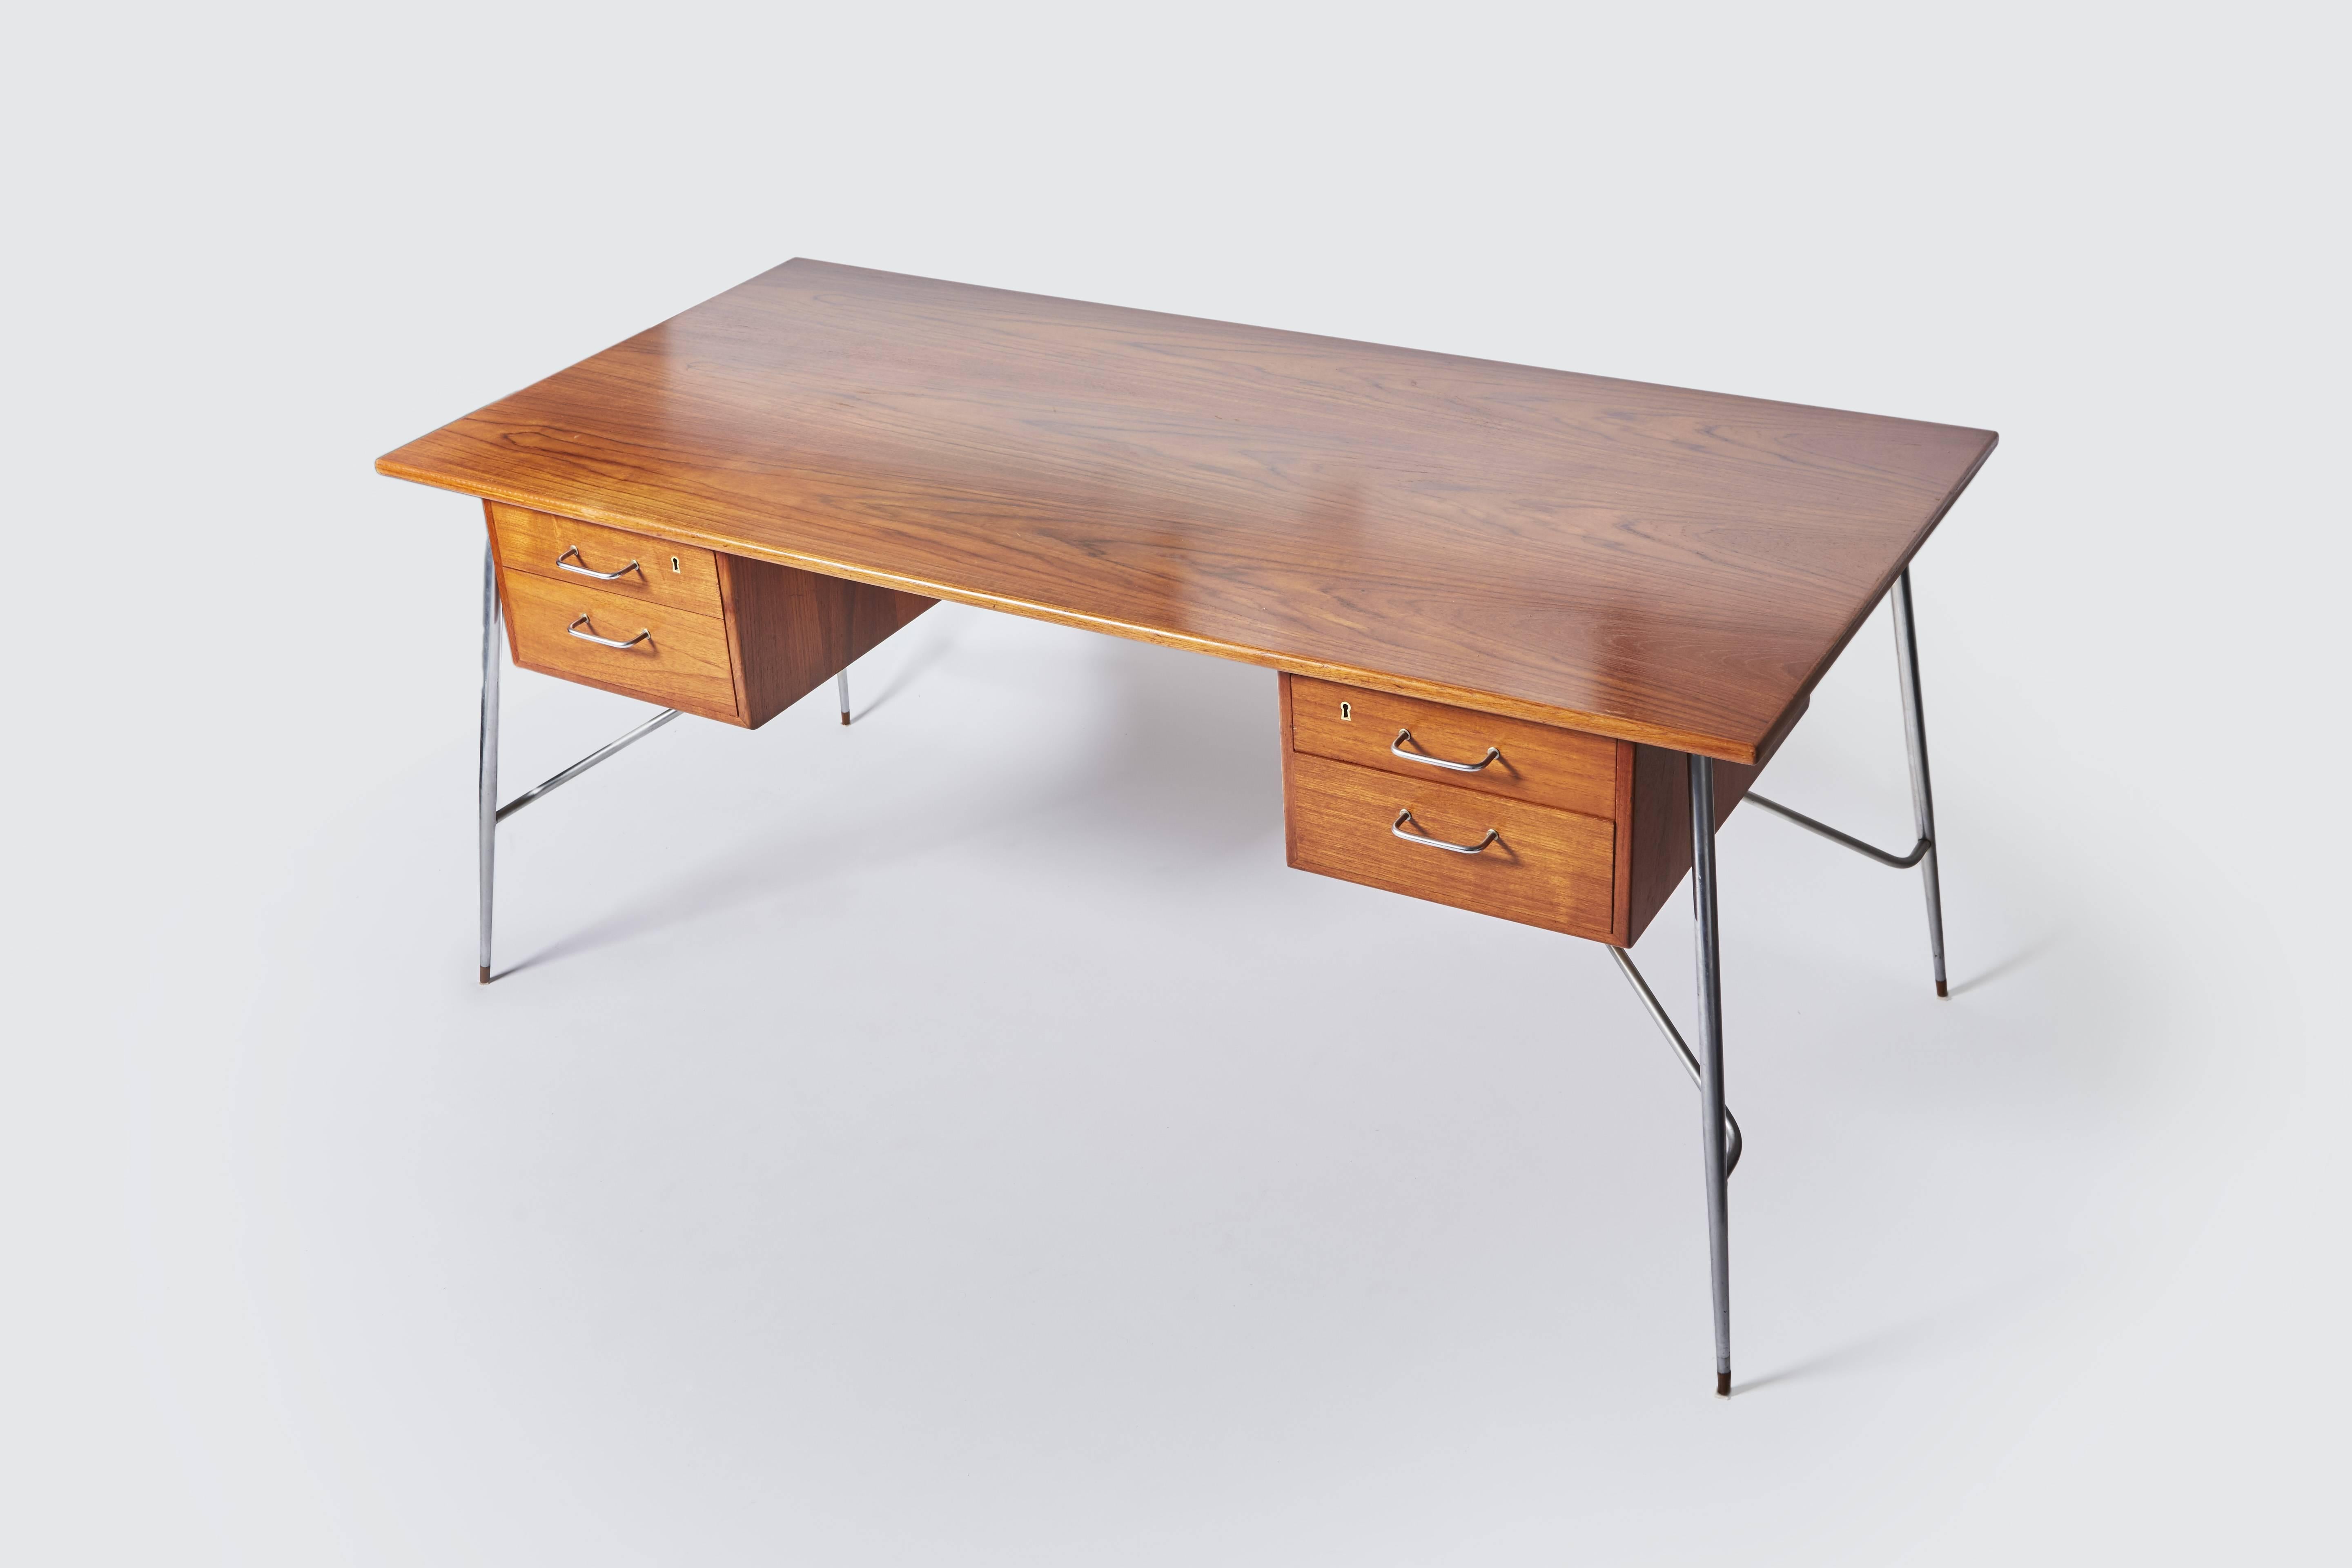 Large four-drawer desk. Teak top and steel leg structure. The two upper drawers are decorated with keyholes.

Desk “202”, Danish work by designer Børge Mogensen, edited by Soborg Mobelfabrik, circa 1953.